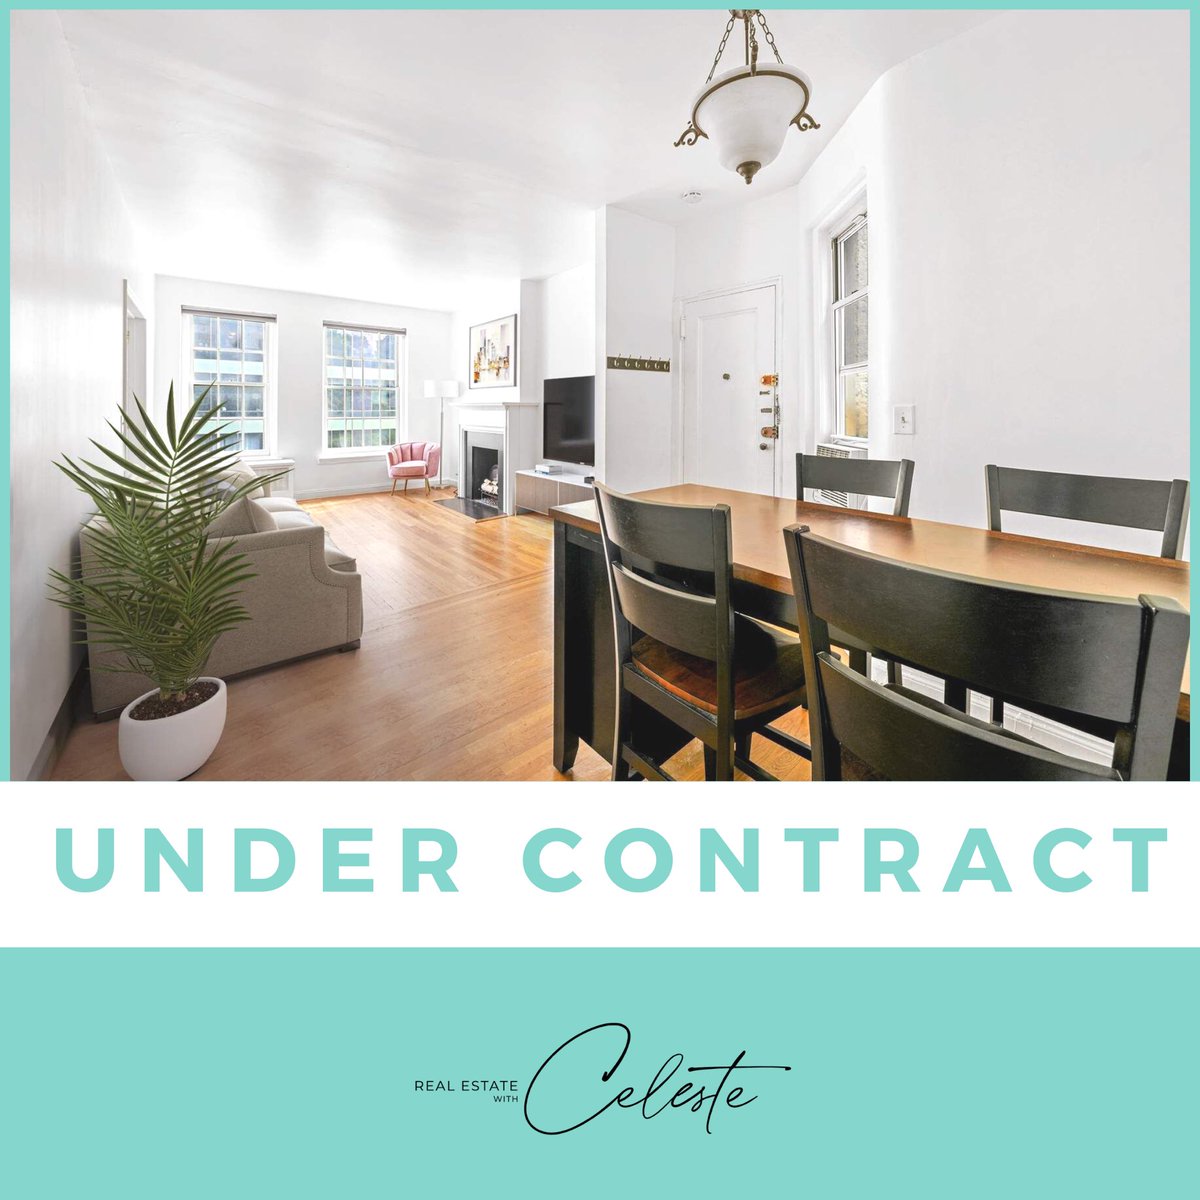 #UNDERCONTRACT • Our seller signed a job offer for across the country & contract to sell her #LenoxHill home on the same day. Talk about the perfect timing ⏱📄 #nycrealestate #realestatewithcelestenyc